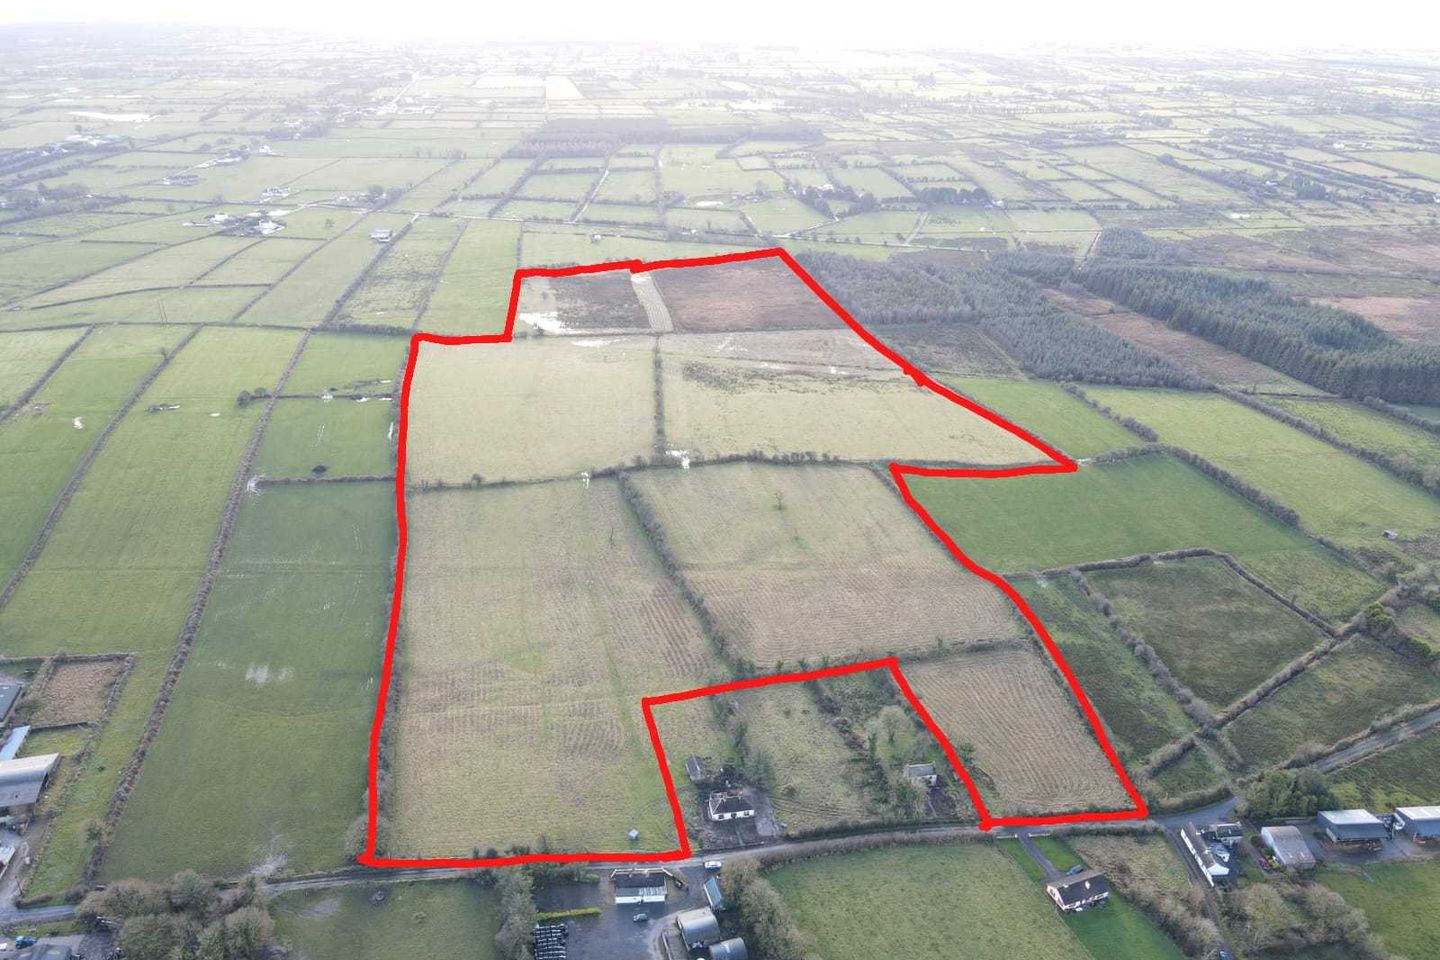 C.50 acres of good quality lands in one lot at Callow, Frenchpark, Co. Roscommon